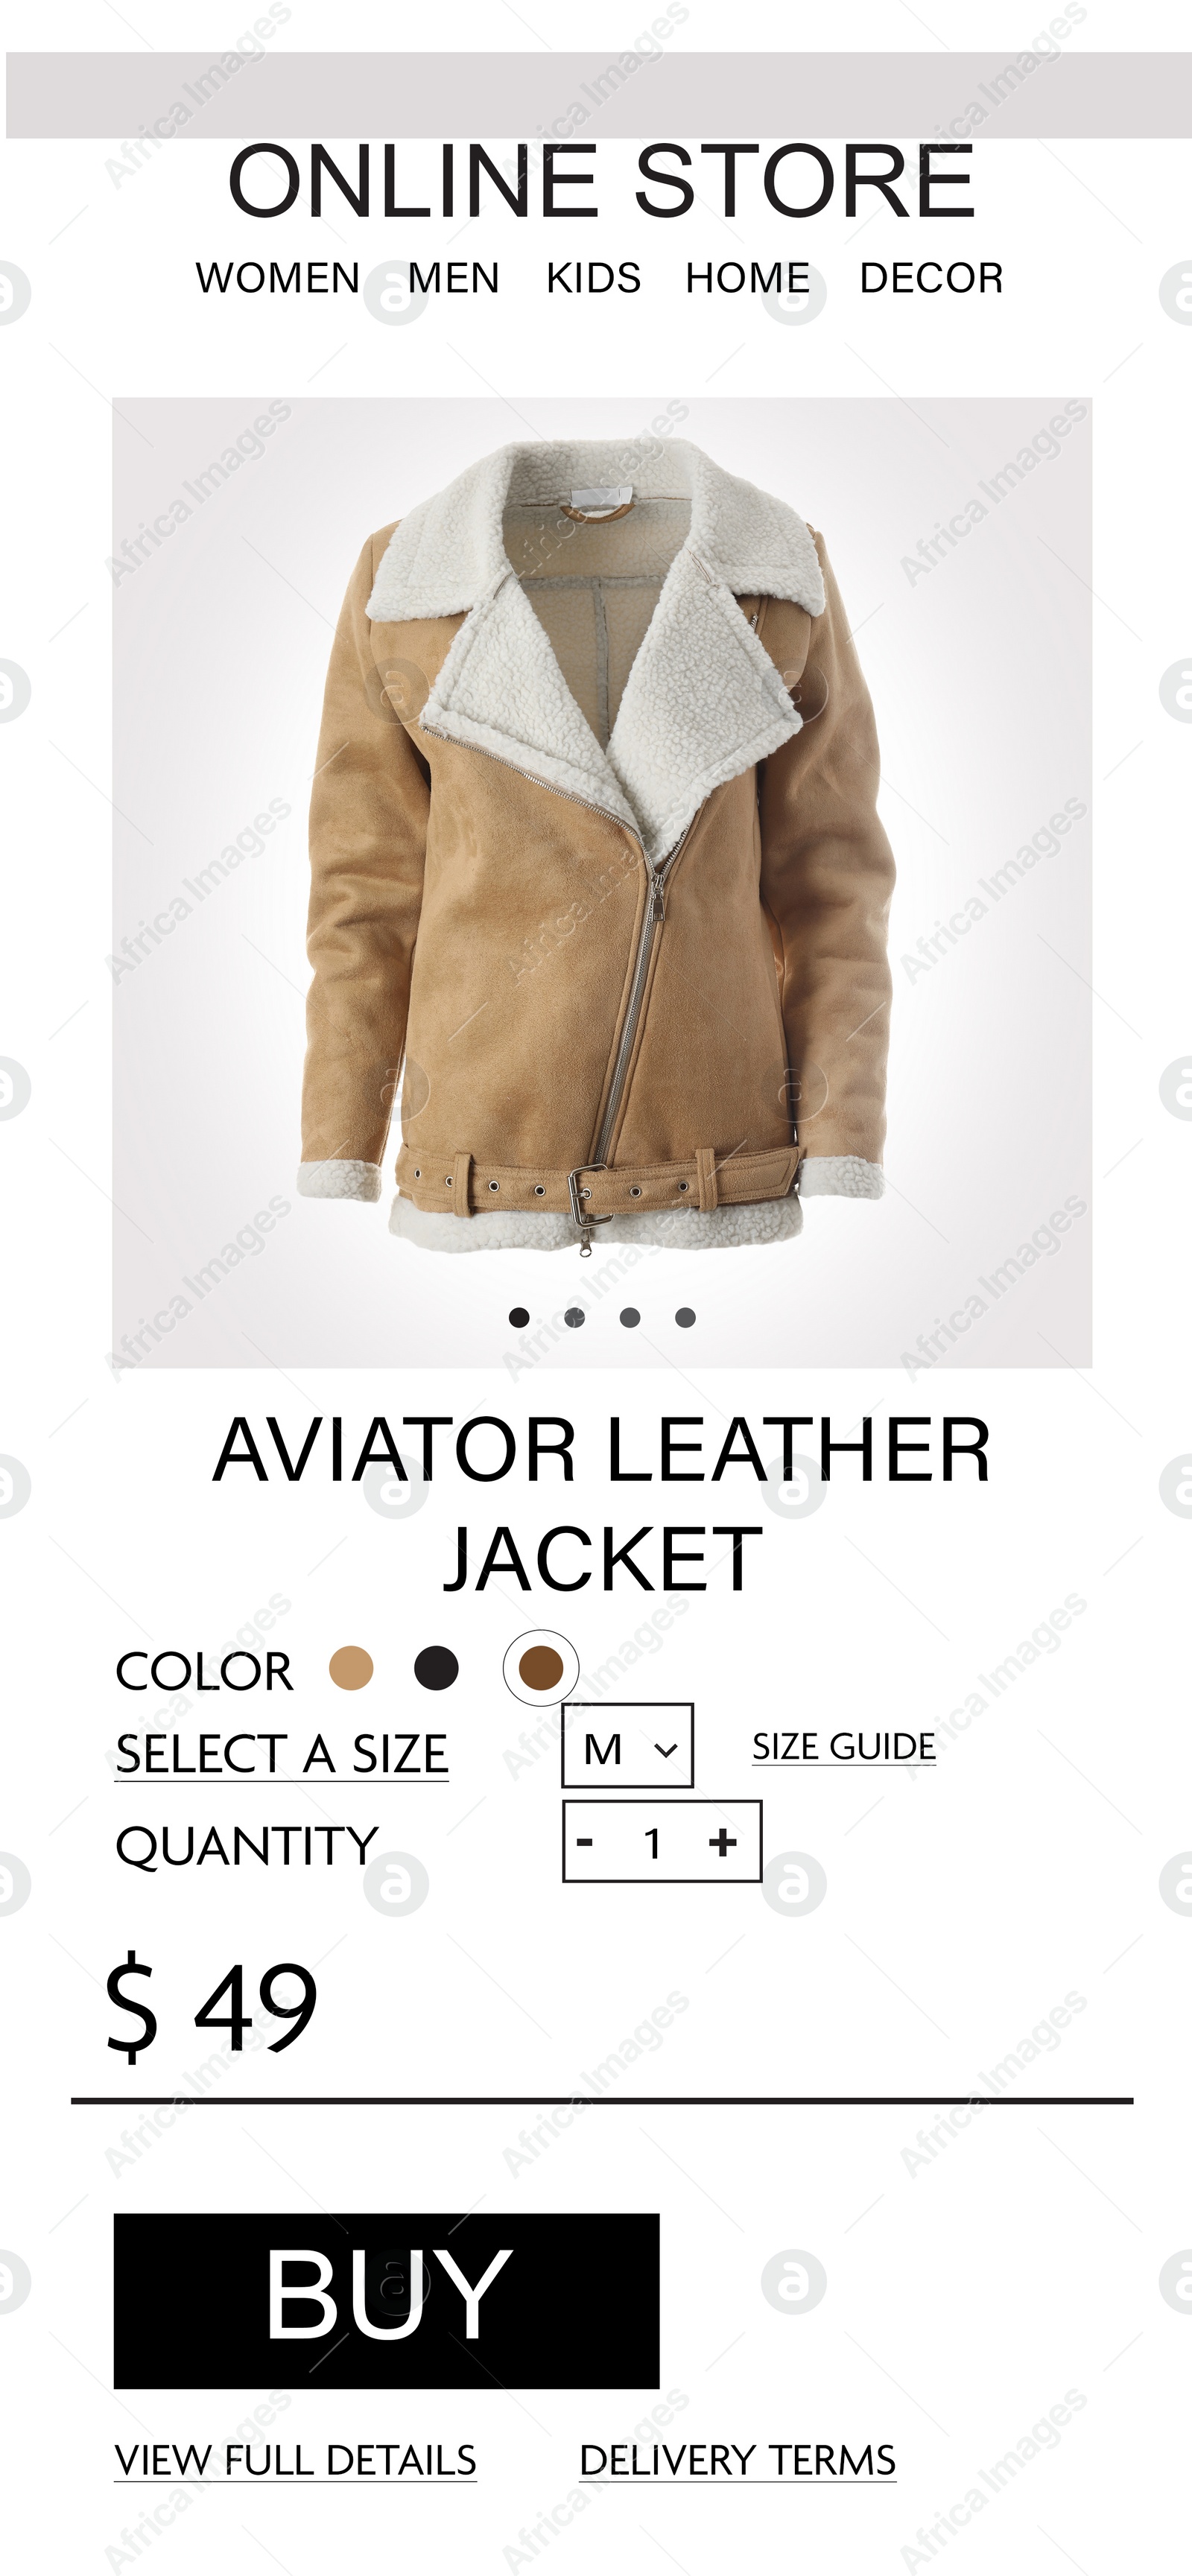 Image of Online store website page with leather jacket and information. Image can be pasted onto smartphone screen